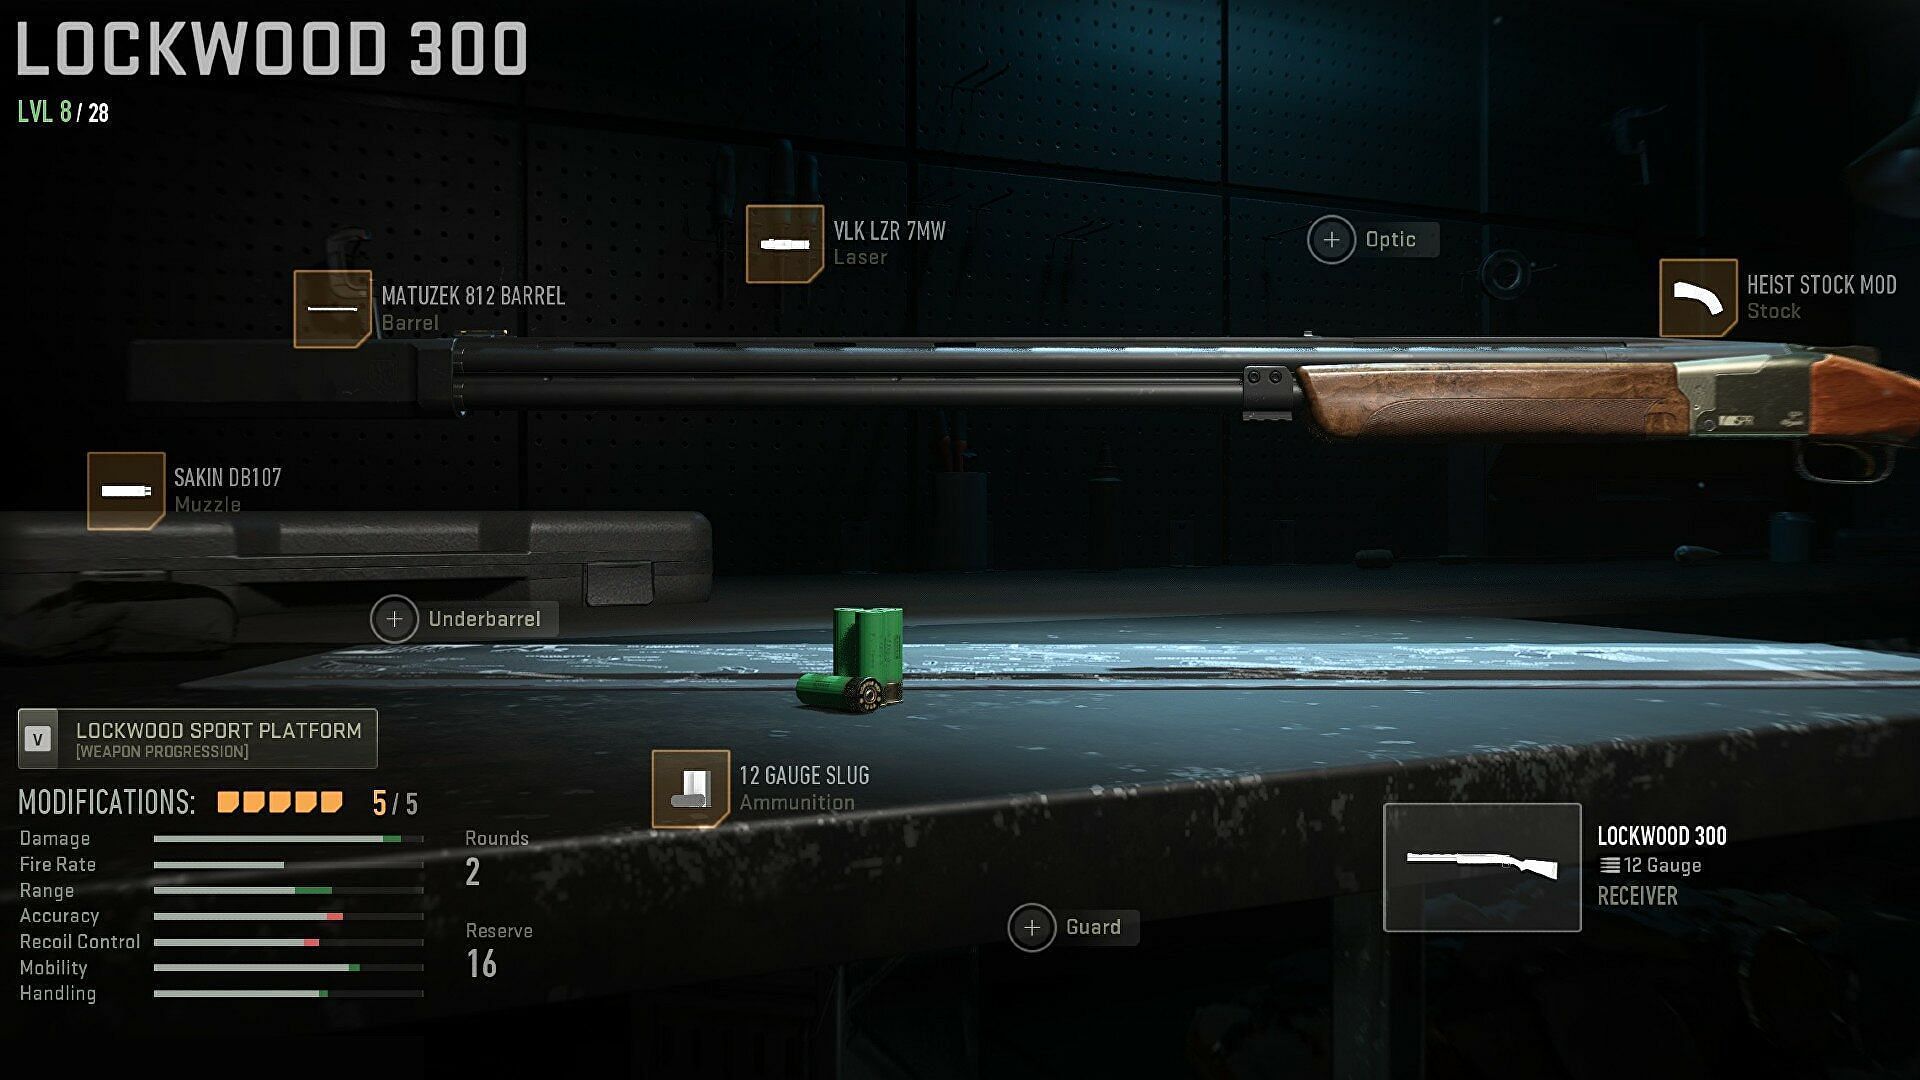 Lockwood 300 loadout in MW2 (Image via Activision)